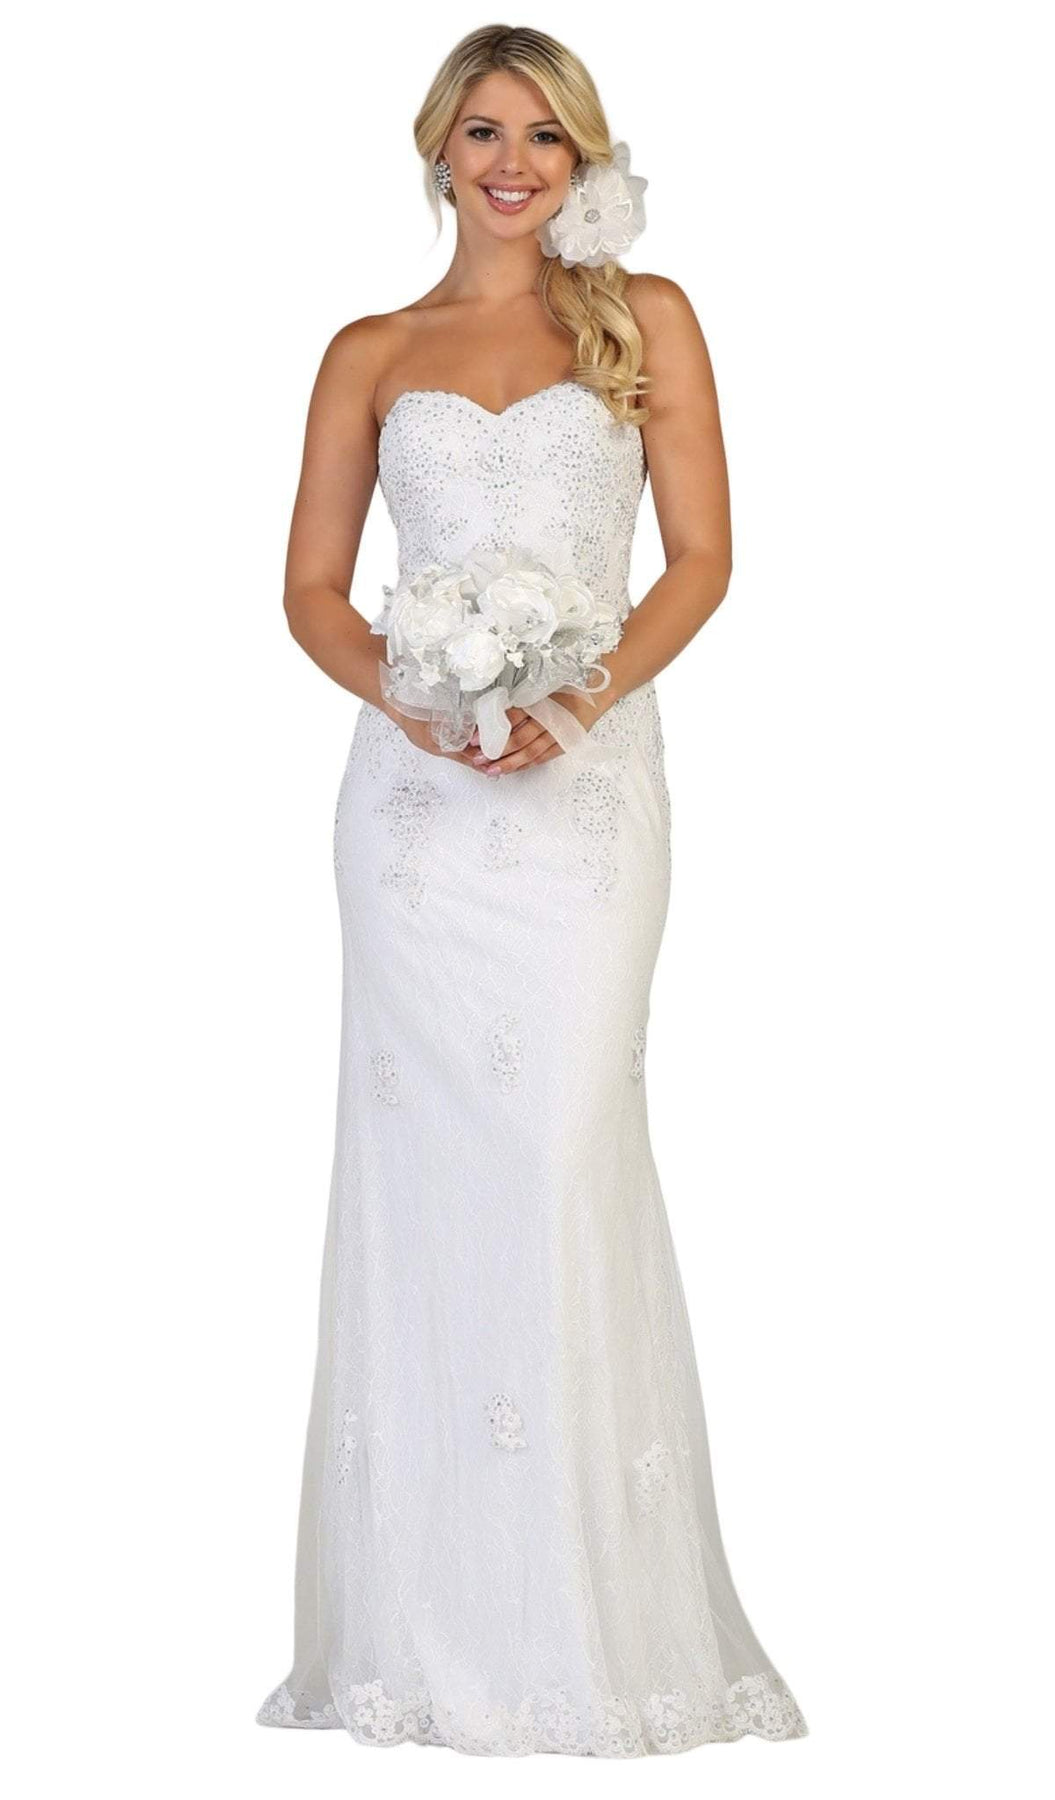 May Queen - MQ1585 Embroidered Sweetheart Sheath Dress With Train Bridesmaid Dresses 4 / White